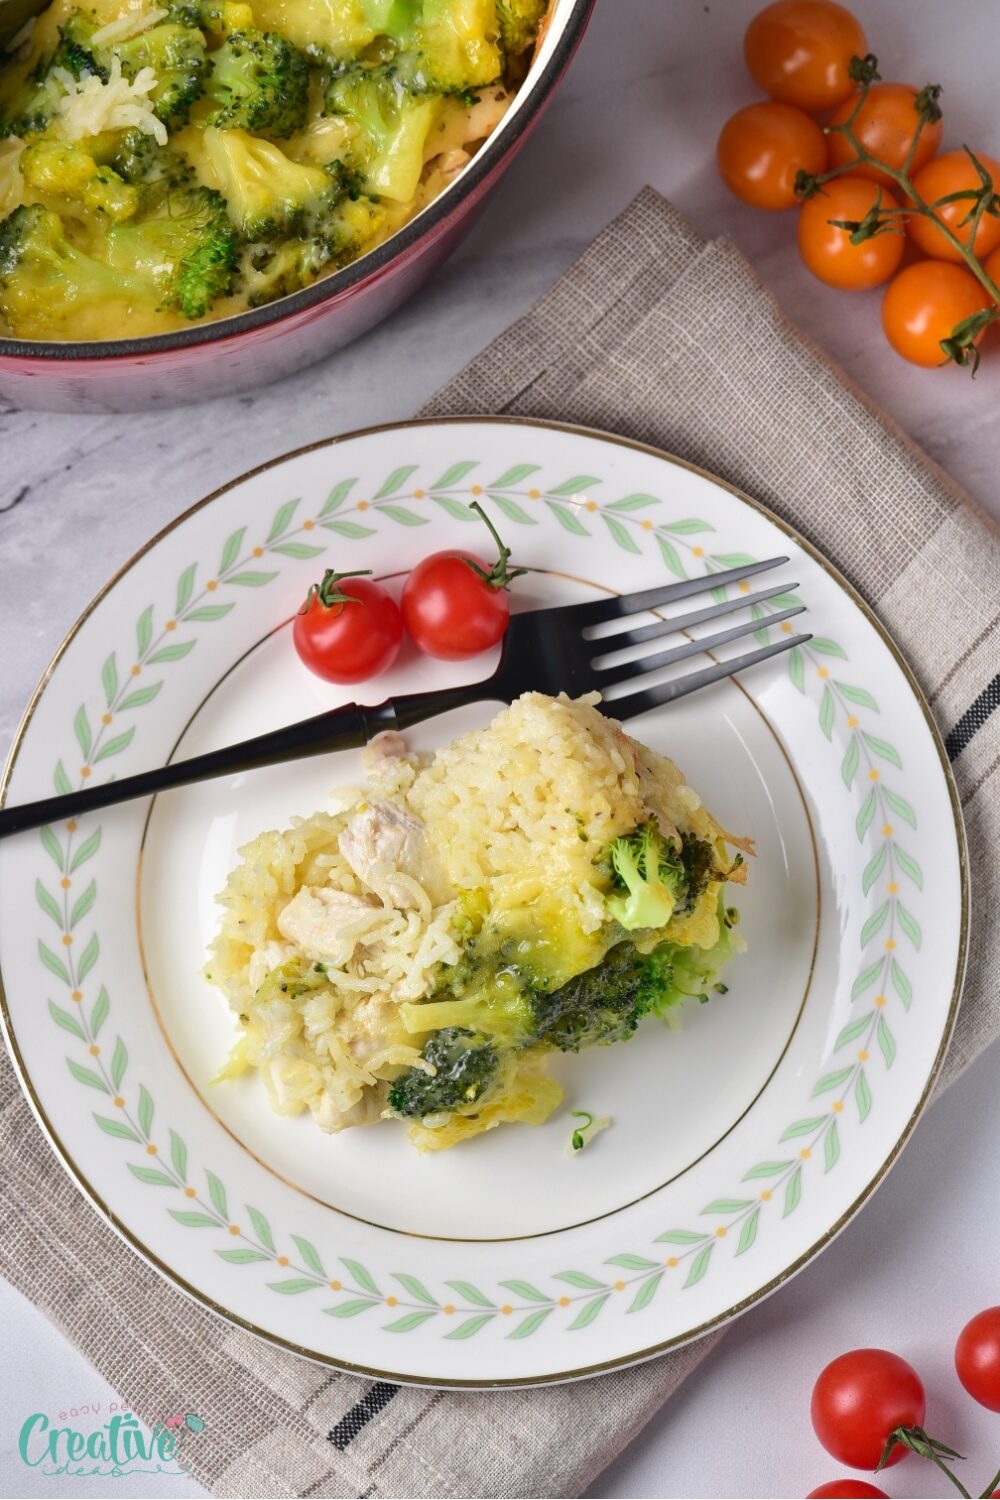 A delicious plate of cheesy chicken broccoli casserole, perfect for a comforting and flavorful meal.